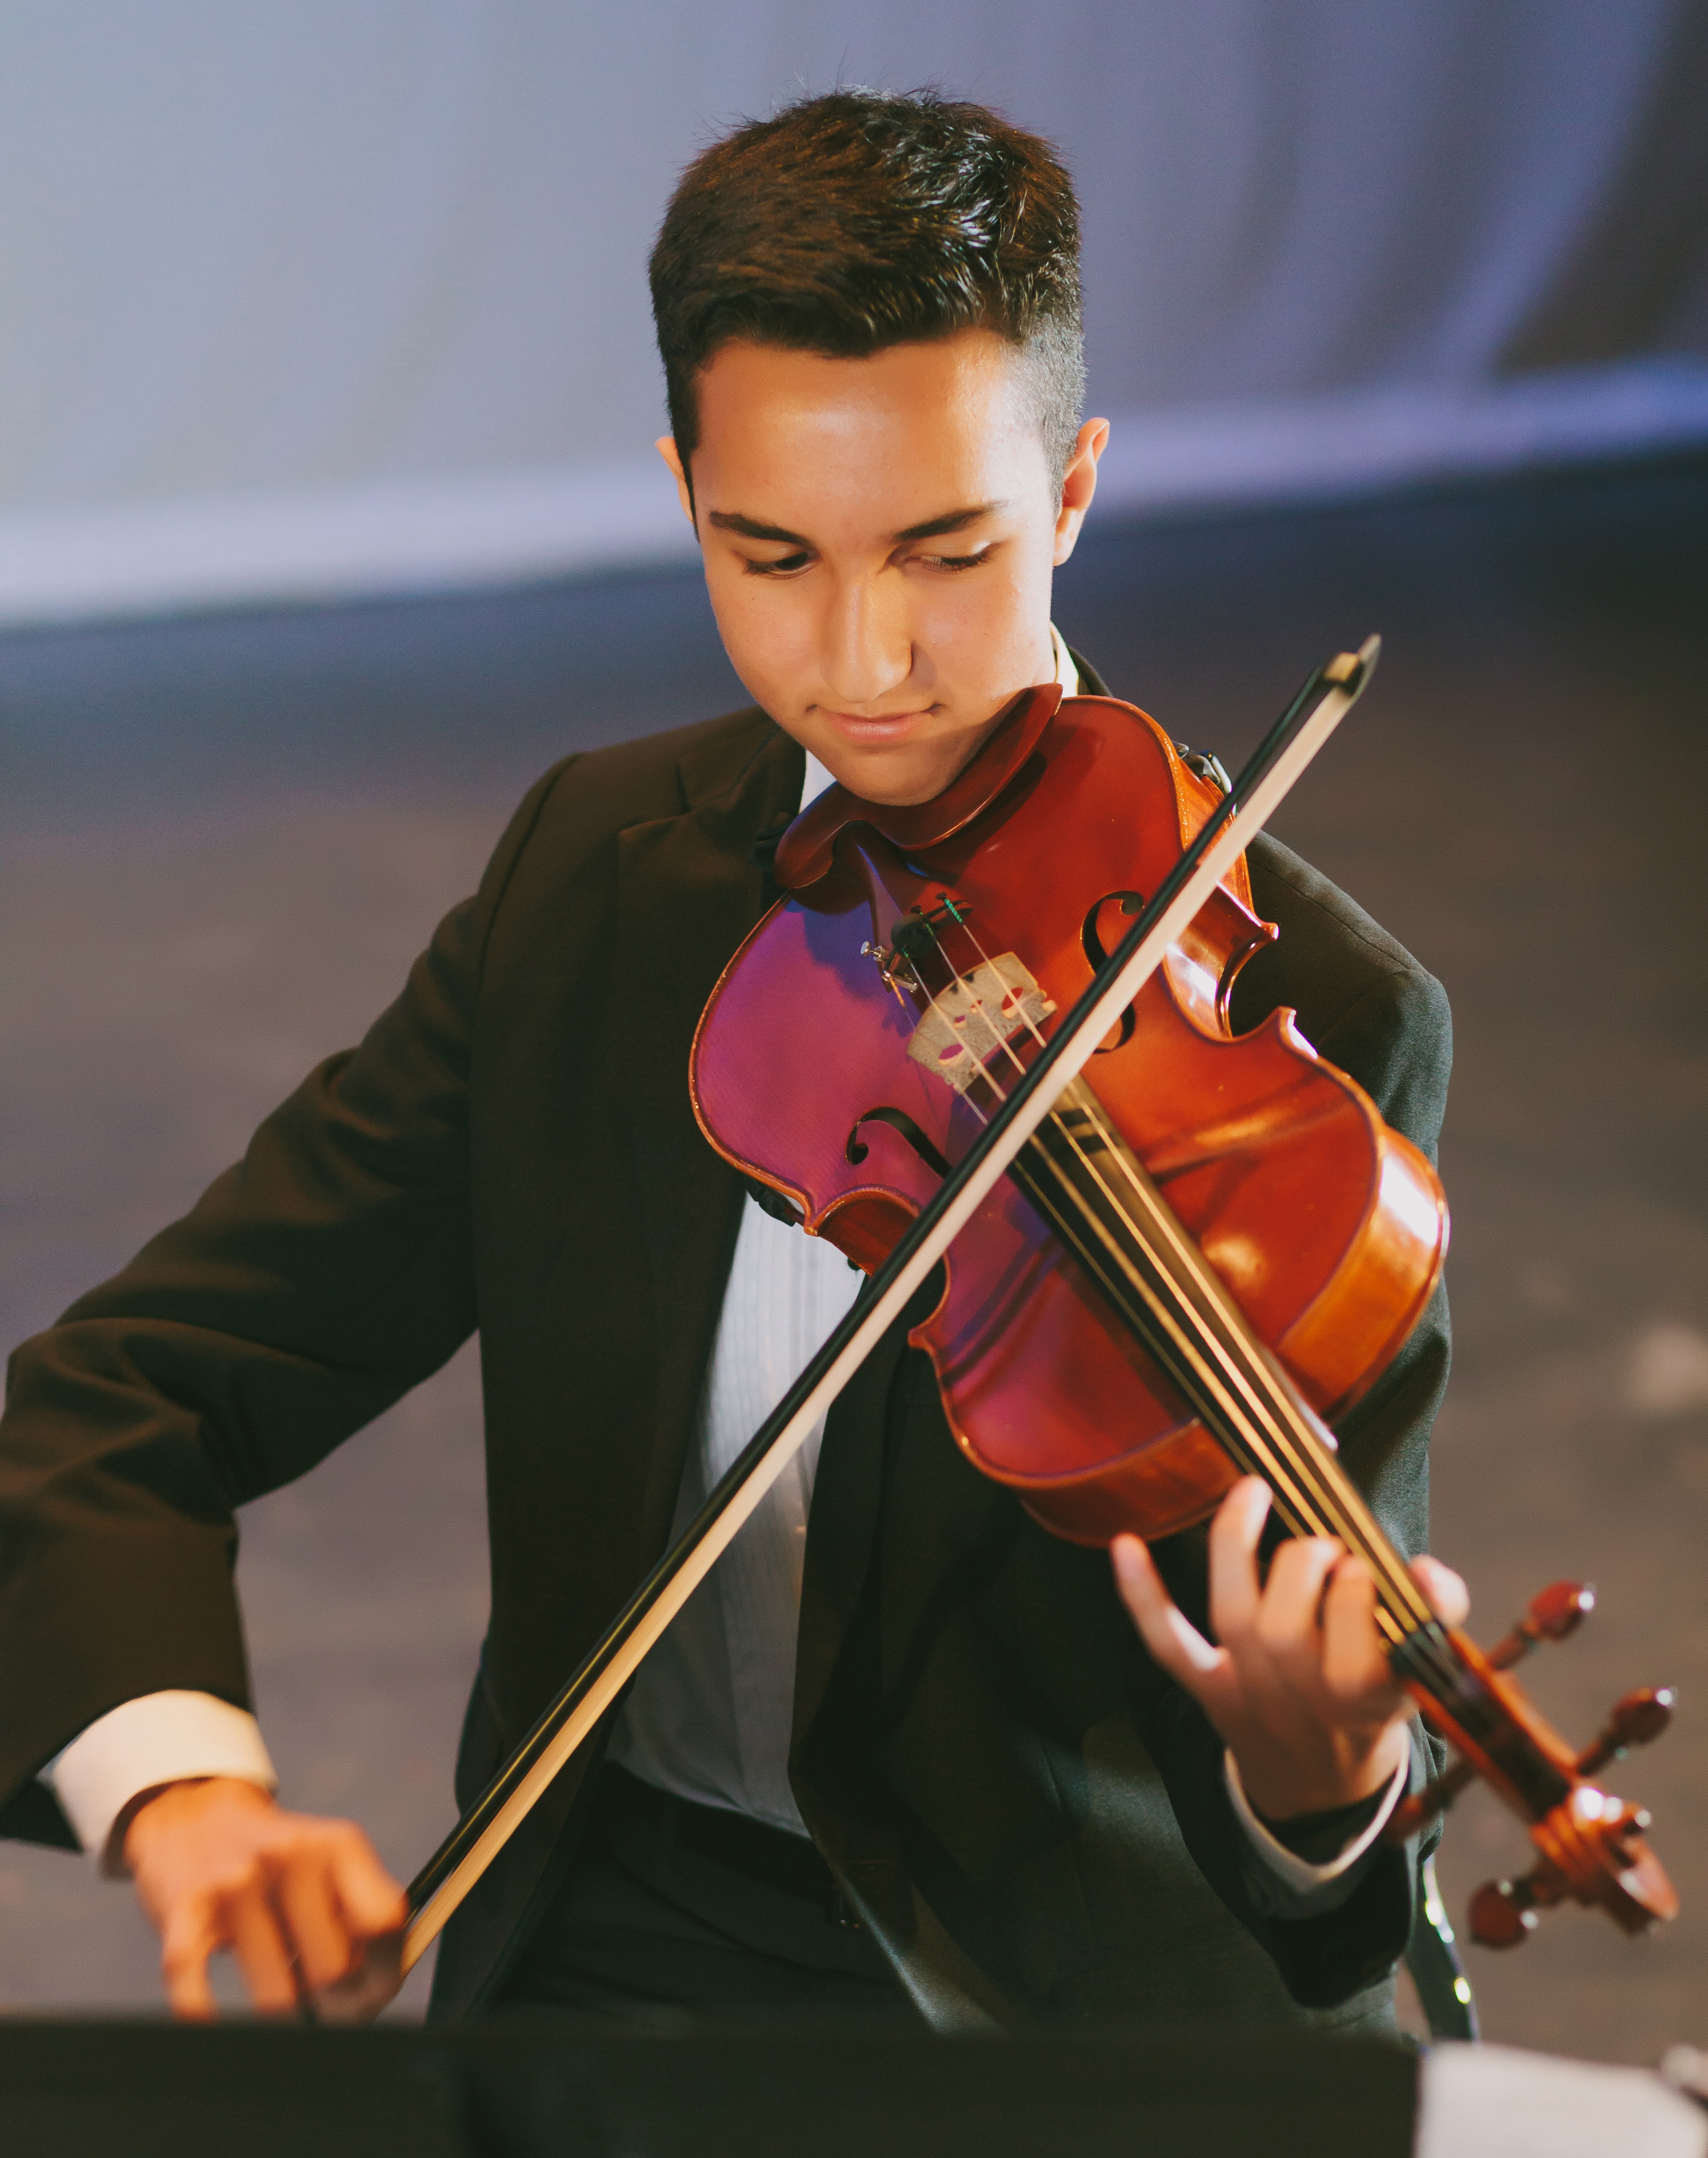 HSHP’s Matthew Garcia selected for musical tour of Latin America with NYO-USA